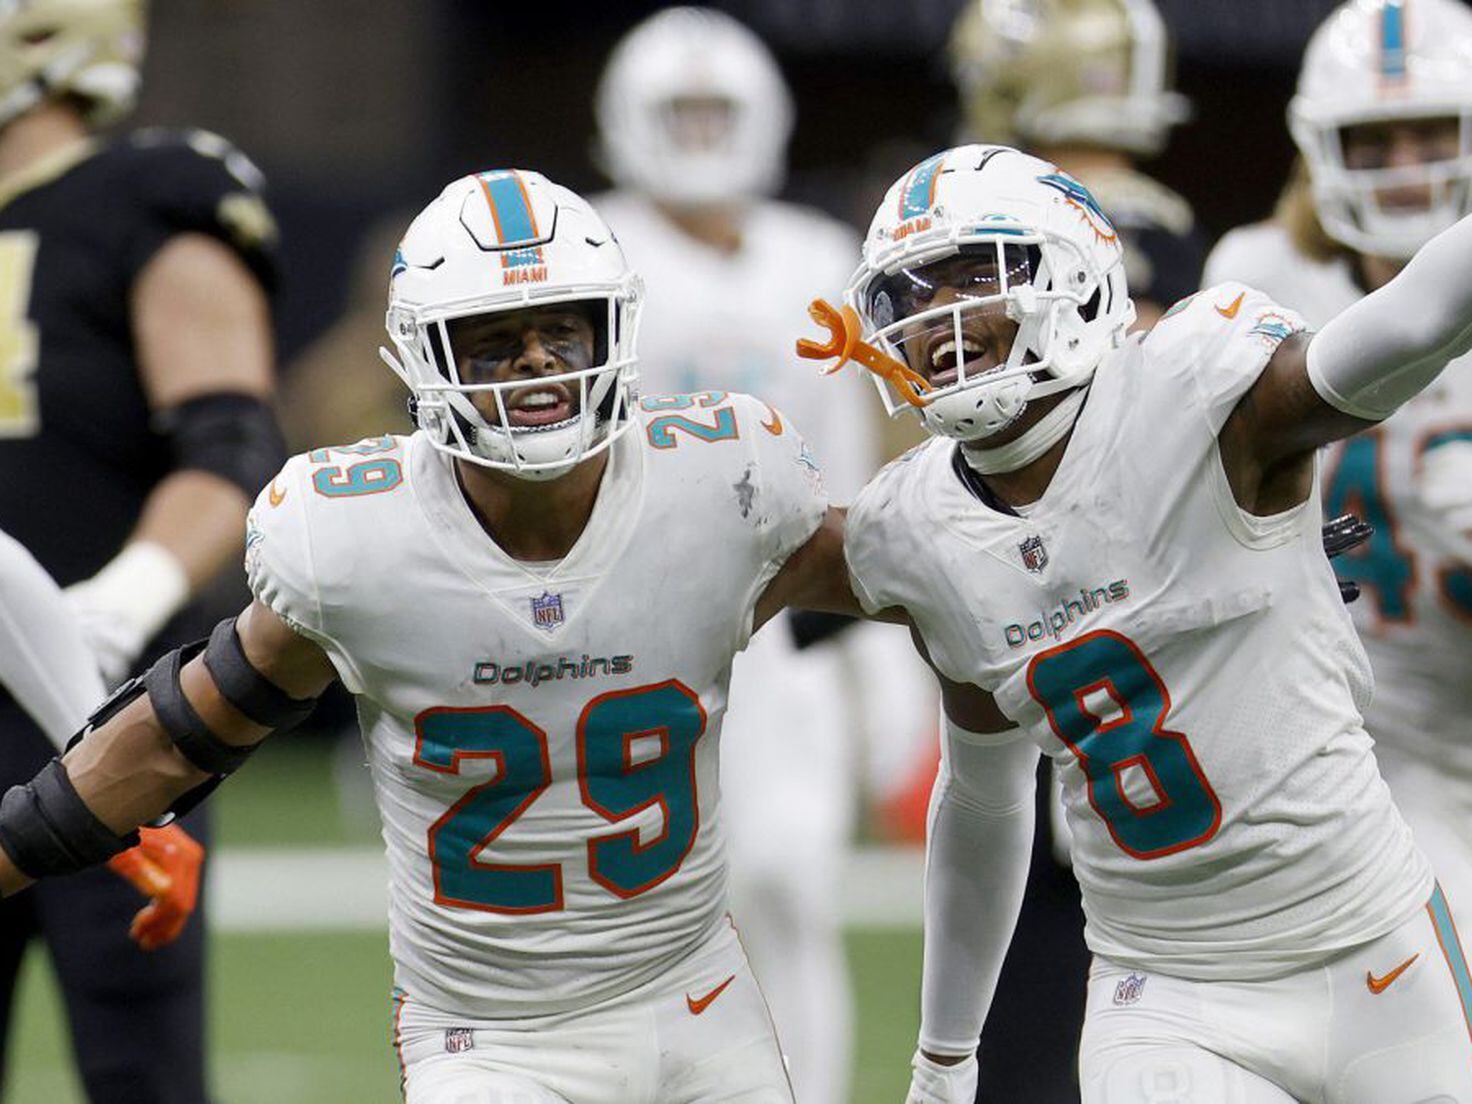 Game Pass Rewind: An 'ugly' game with Miami ends with a beautiful drive